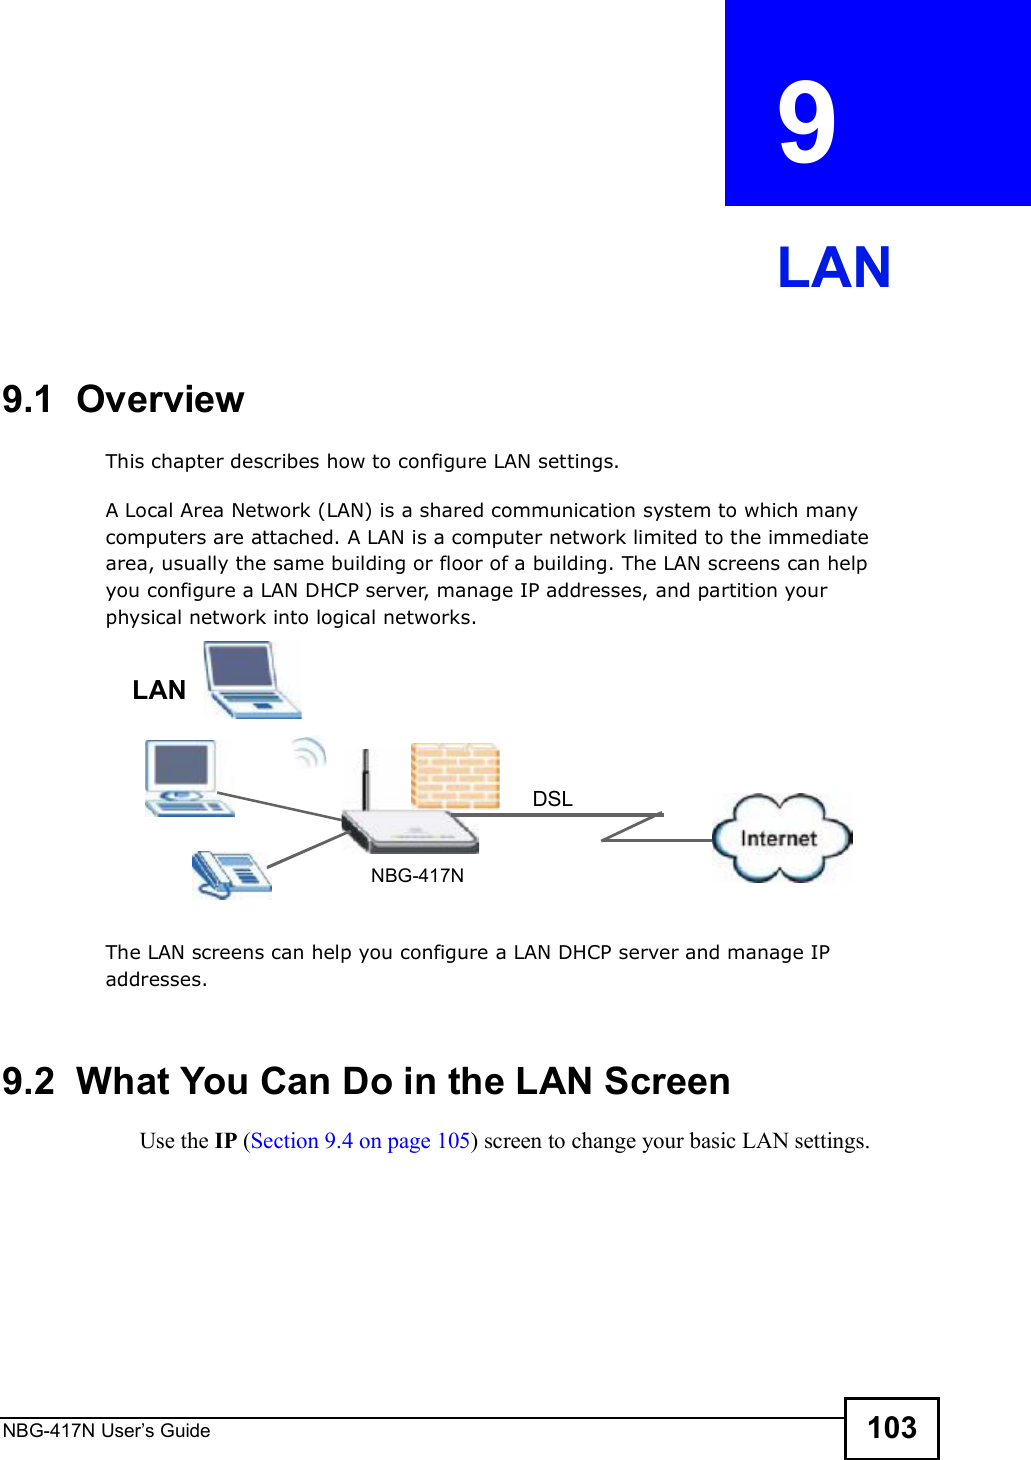 NBG-417N User s Guide 103CHAPTER  9 LAN9.1  OverviewThis chapter describes how to configure LAN settings.A Local Area Network (LAN) is a shared communication system to which many computers are attached. A LAN is a computer network limited to the immediate area, usually the same building or floor of a building. The LAN screens can help you configure a LAN DHCP server, manage IP addresses, and partition your physical network into logical networks.The LAN screens can help you configure a LAN DHCP server and manage IP addresses.9.2  What You Can Do in the LAN ScreenUse the IP (Section 9.4 on page 105) screen to change your basic LAN settings.DSLLANNBG-417N